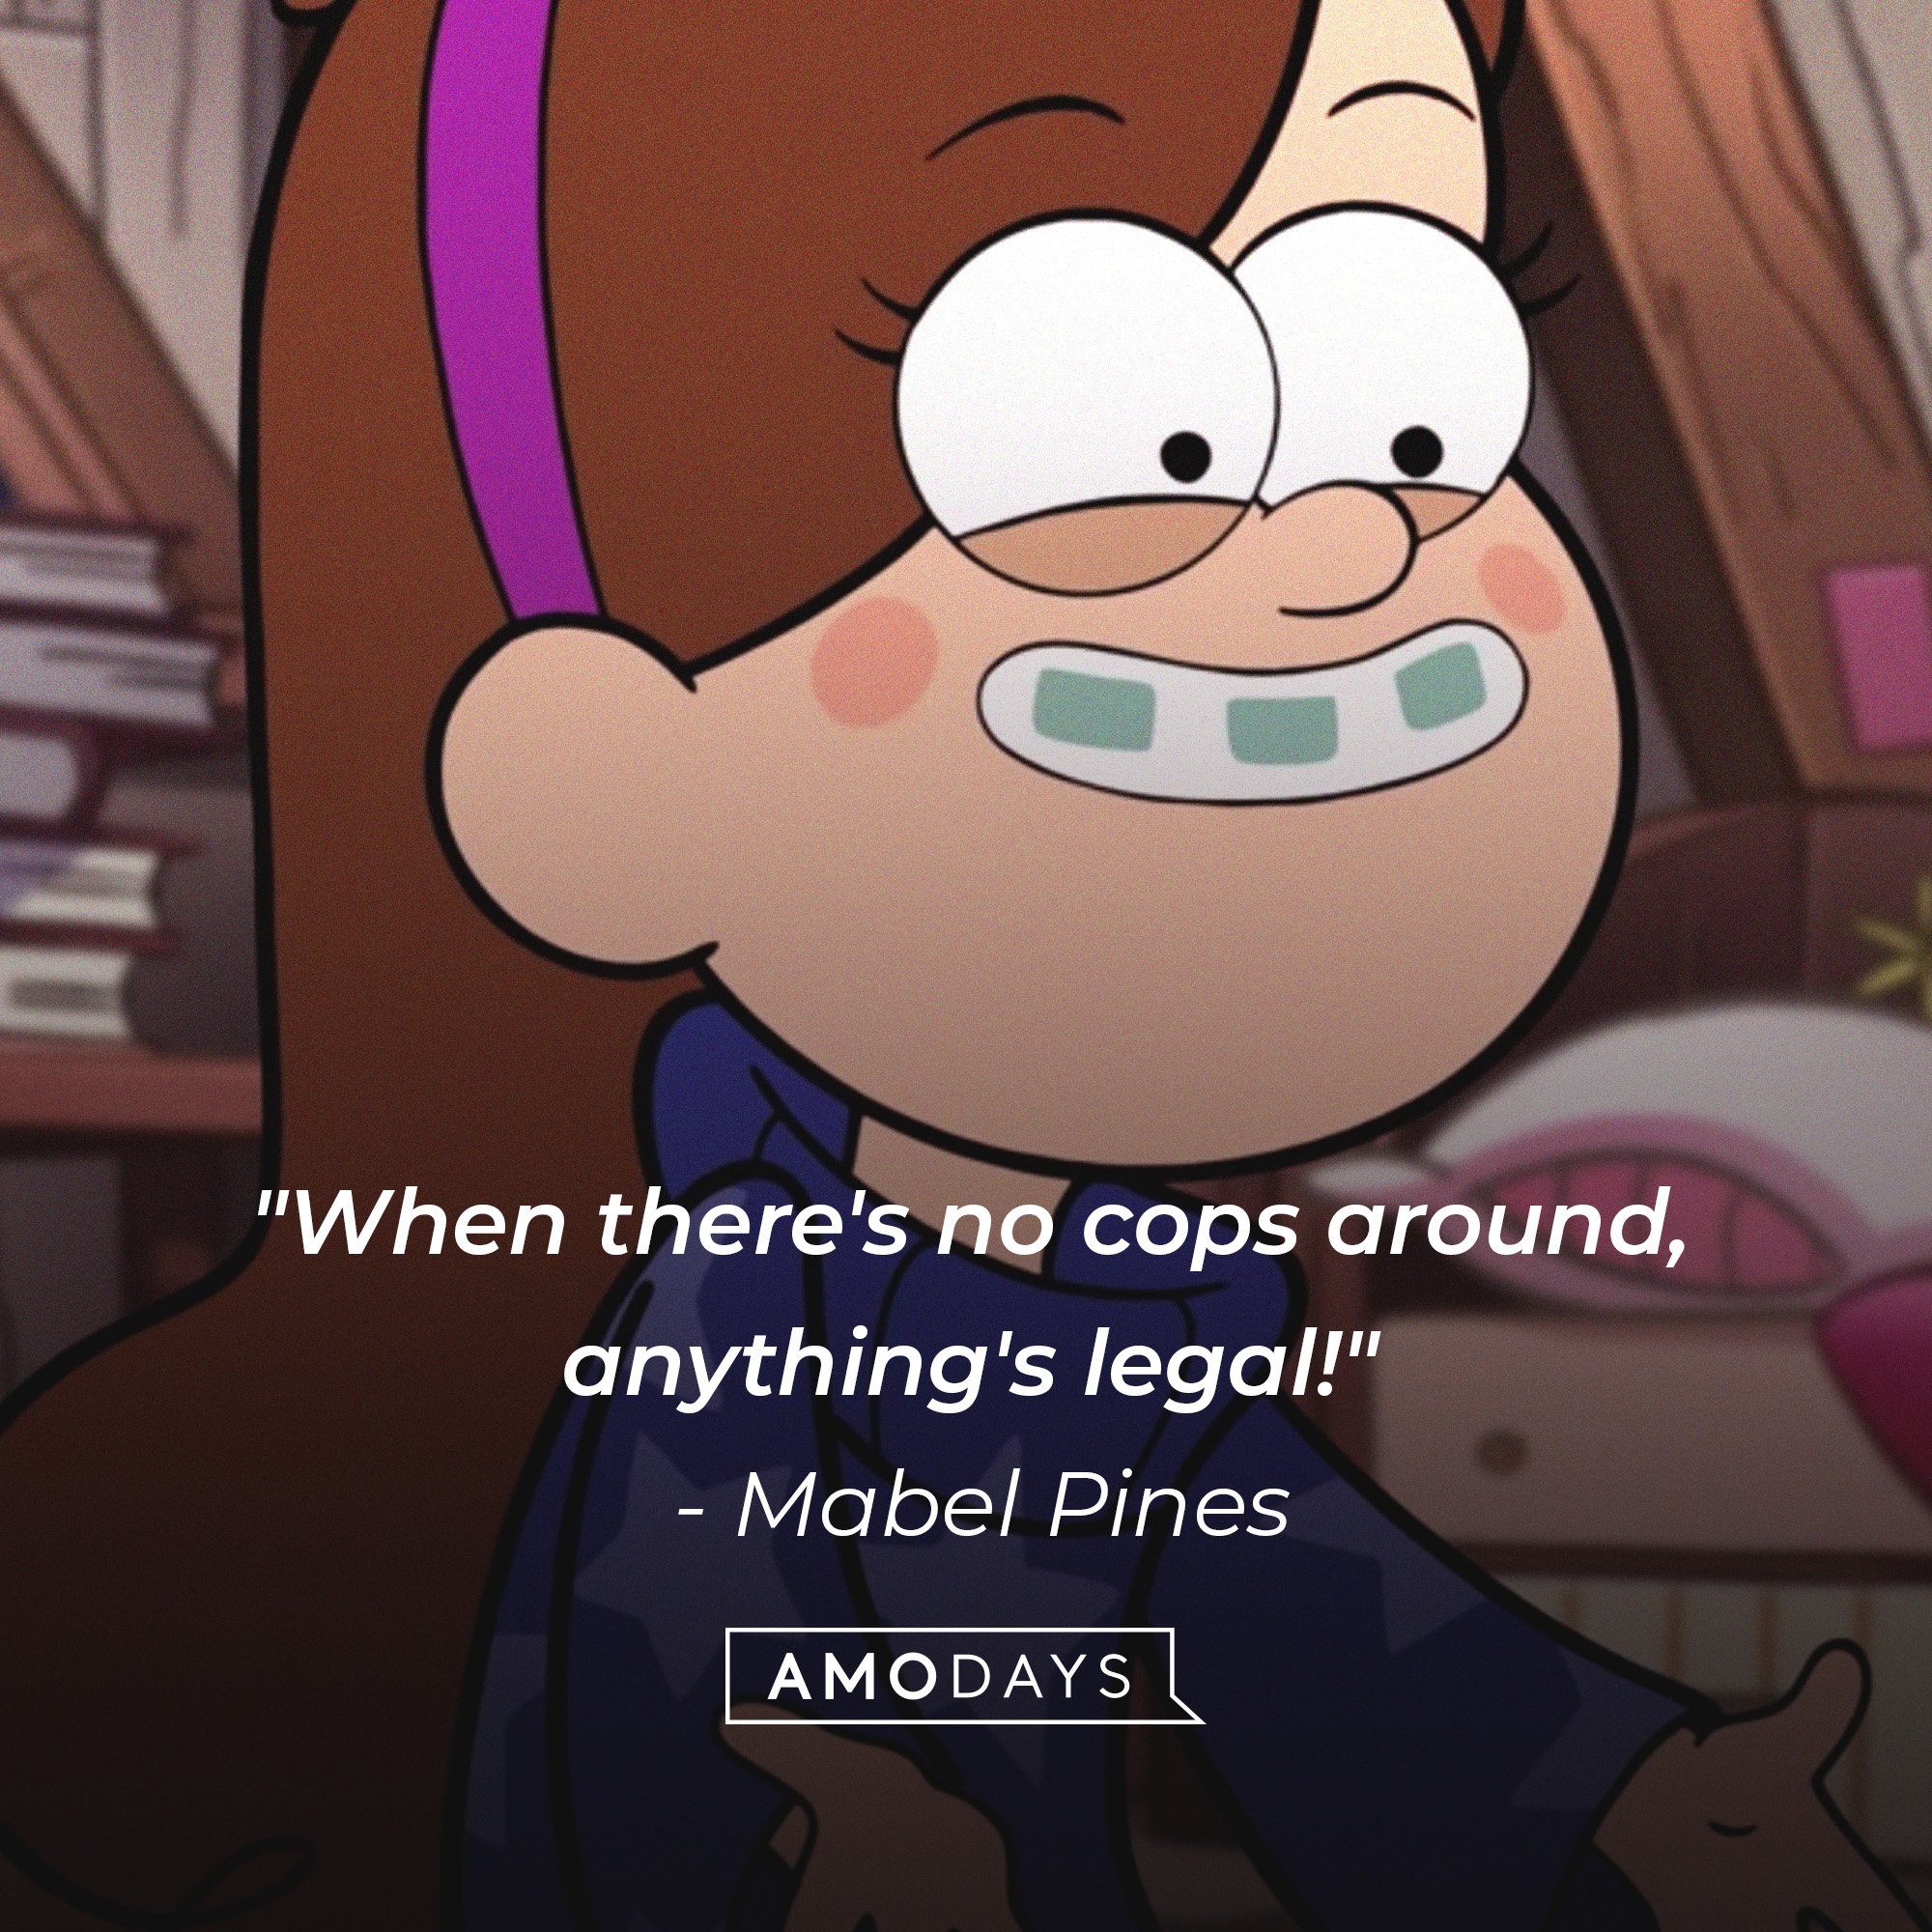 Mabel Pines’ quote: "When there's no cops around, anything's legal!" | Image: AmoDays